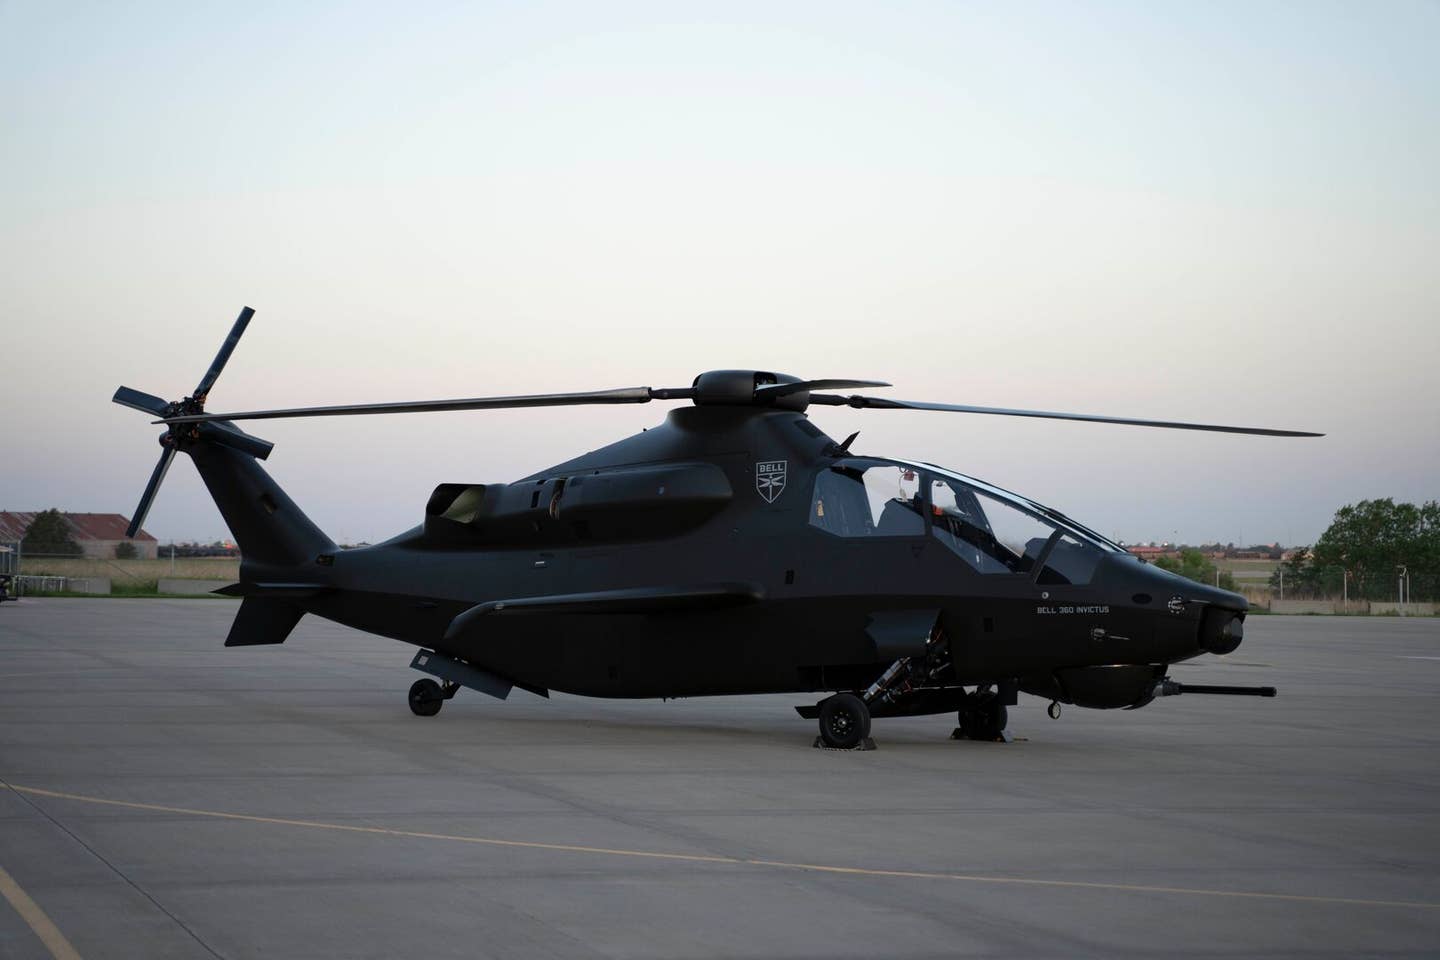 The single engine exhaust port is visible between the main rotor hub and tail. <em>Bell Photo</em>